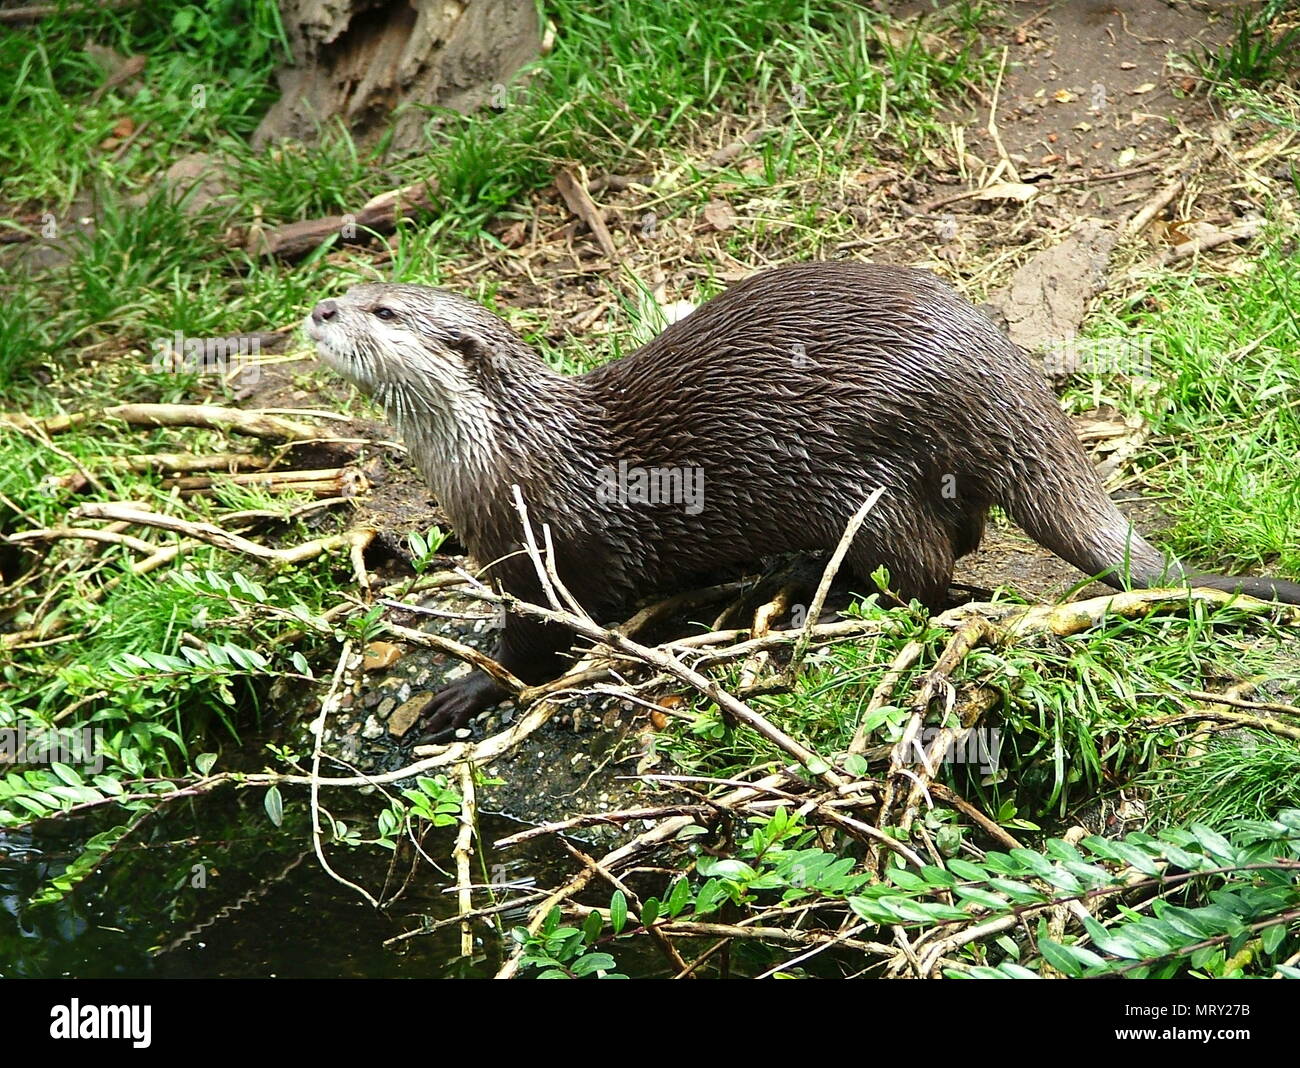 Oriental small-clawed otter in the nature Stock Photo